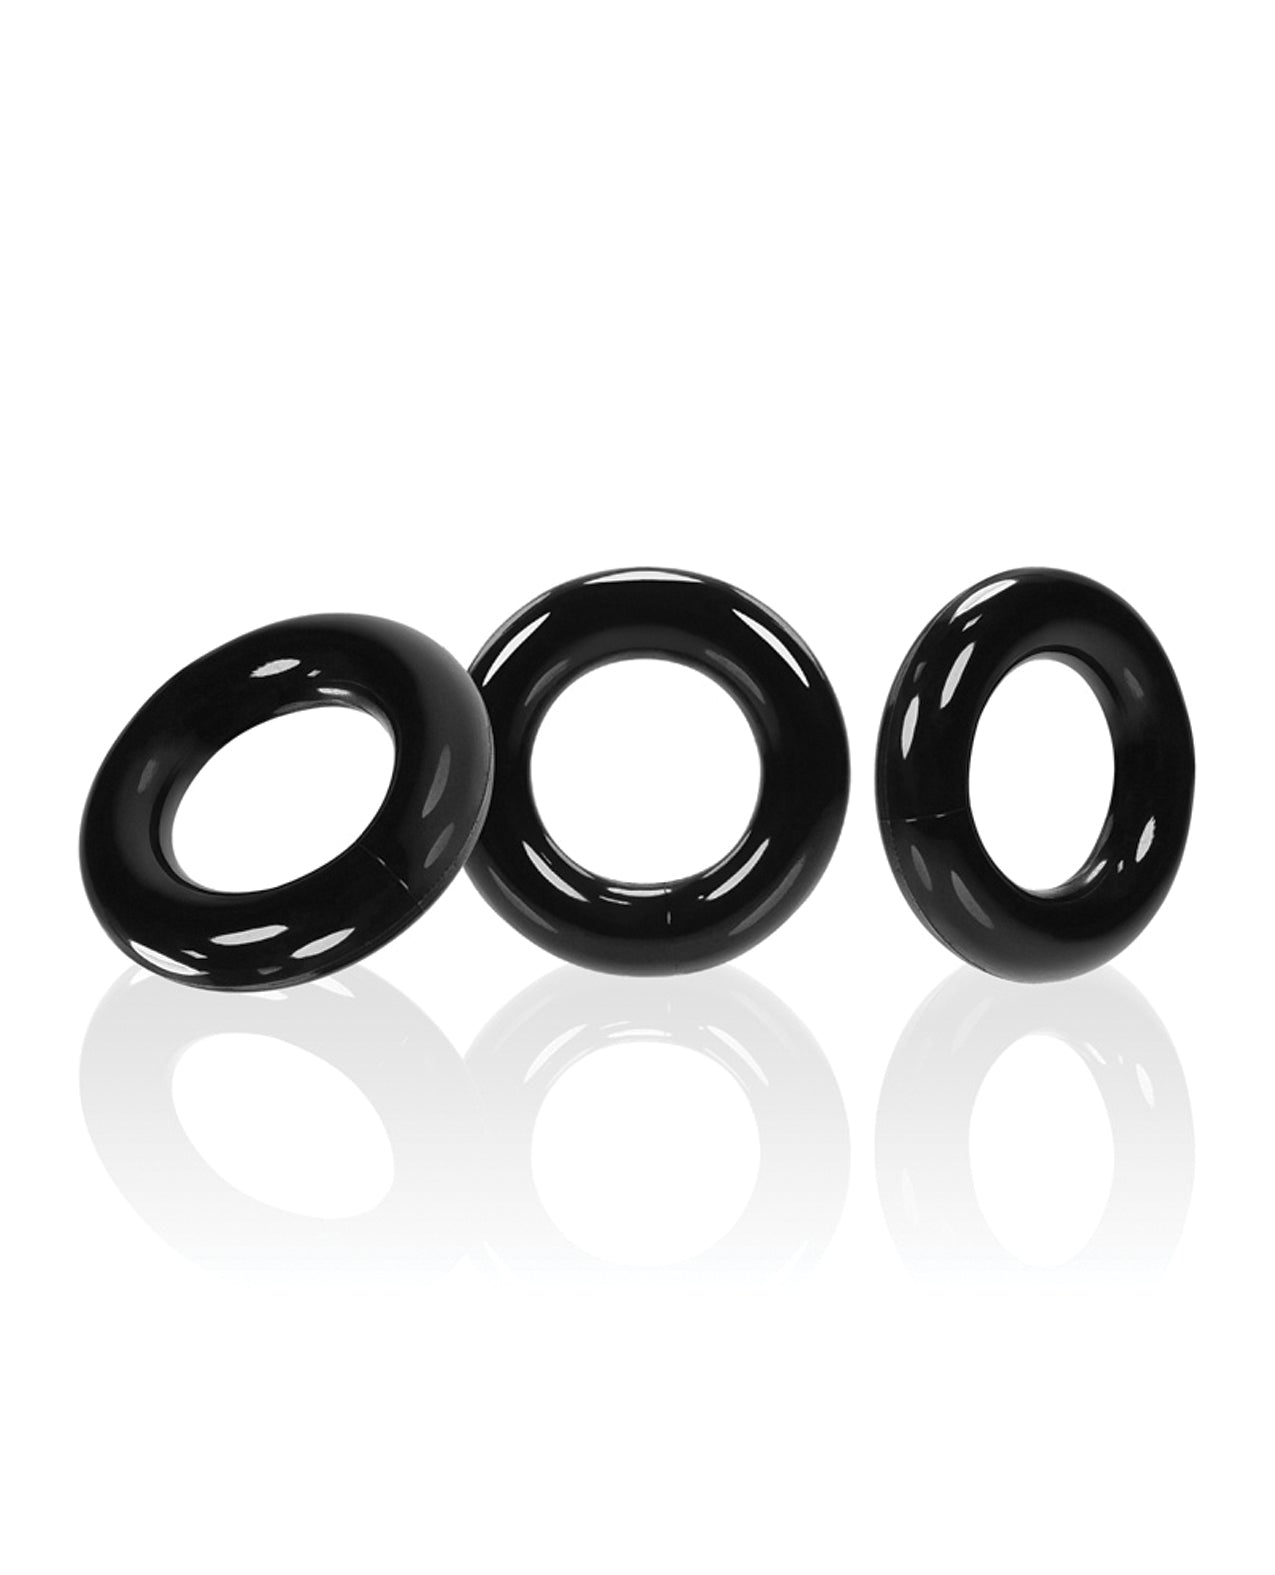 Oxballs Willy Rings - Assorted Colors